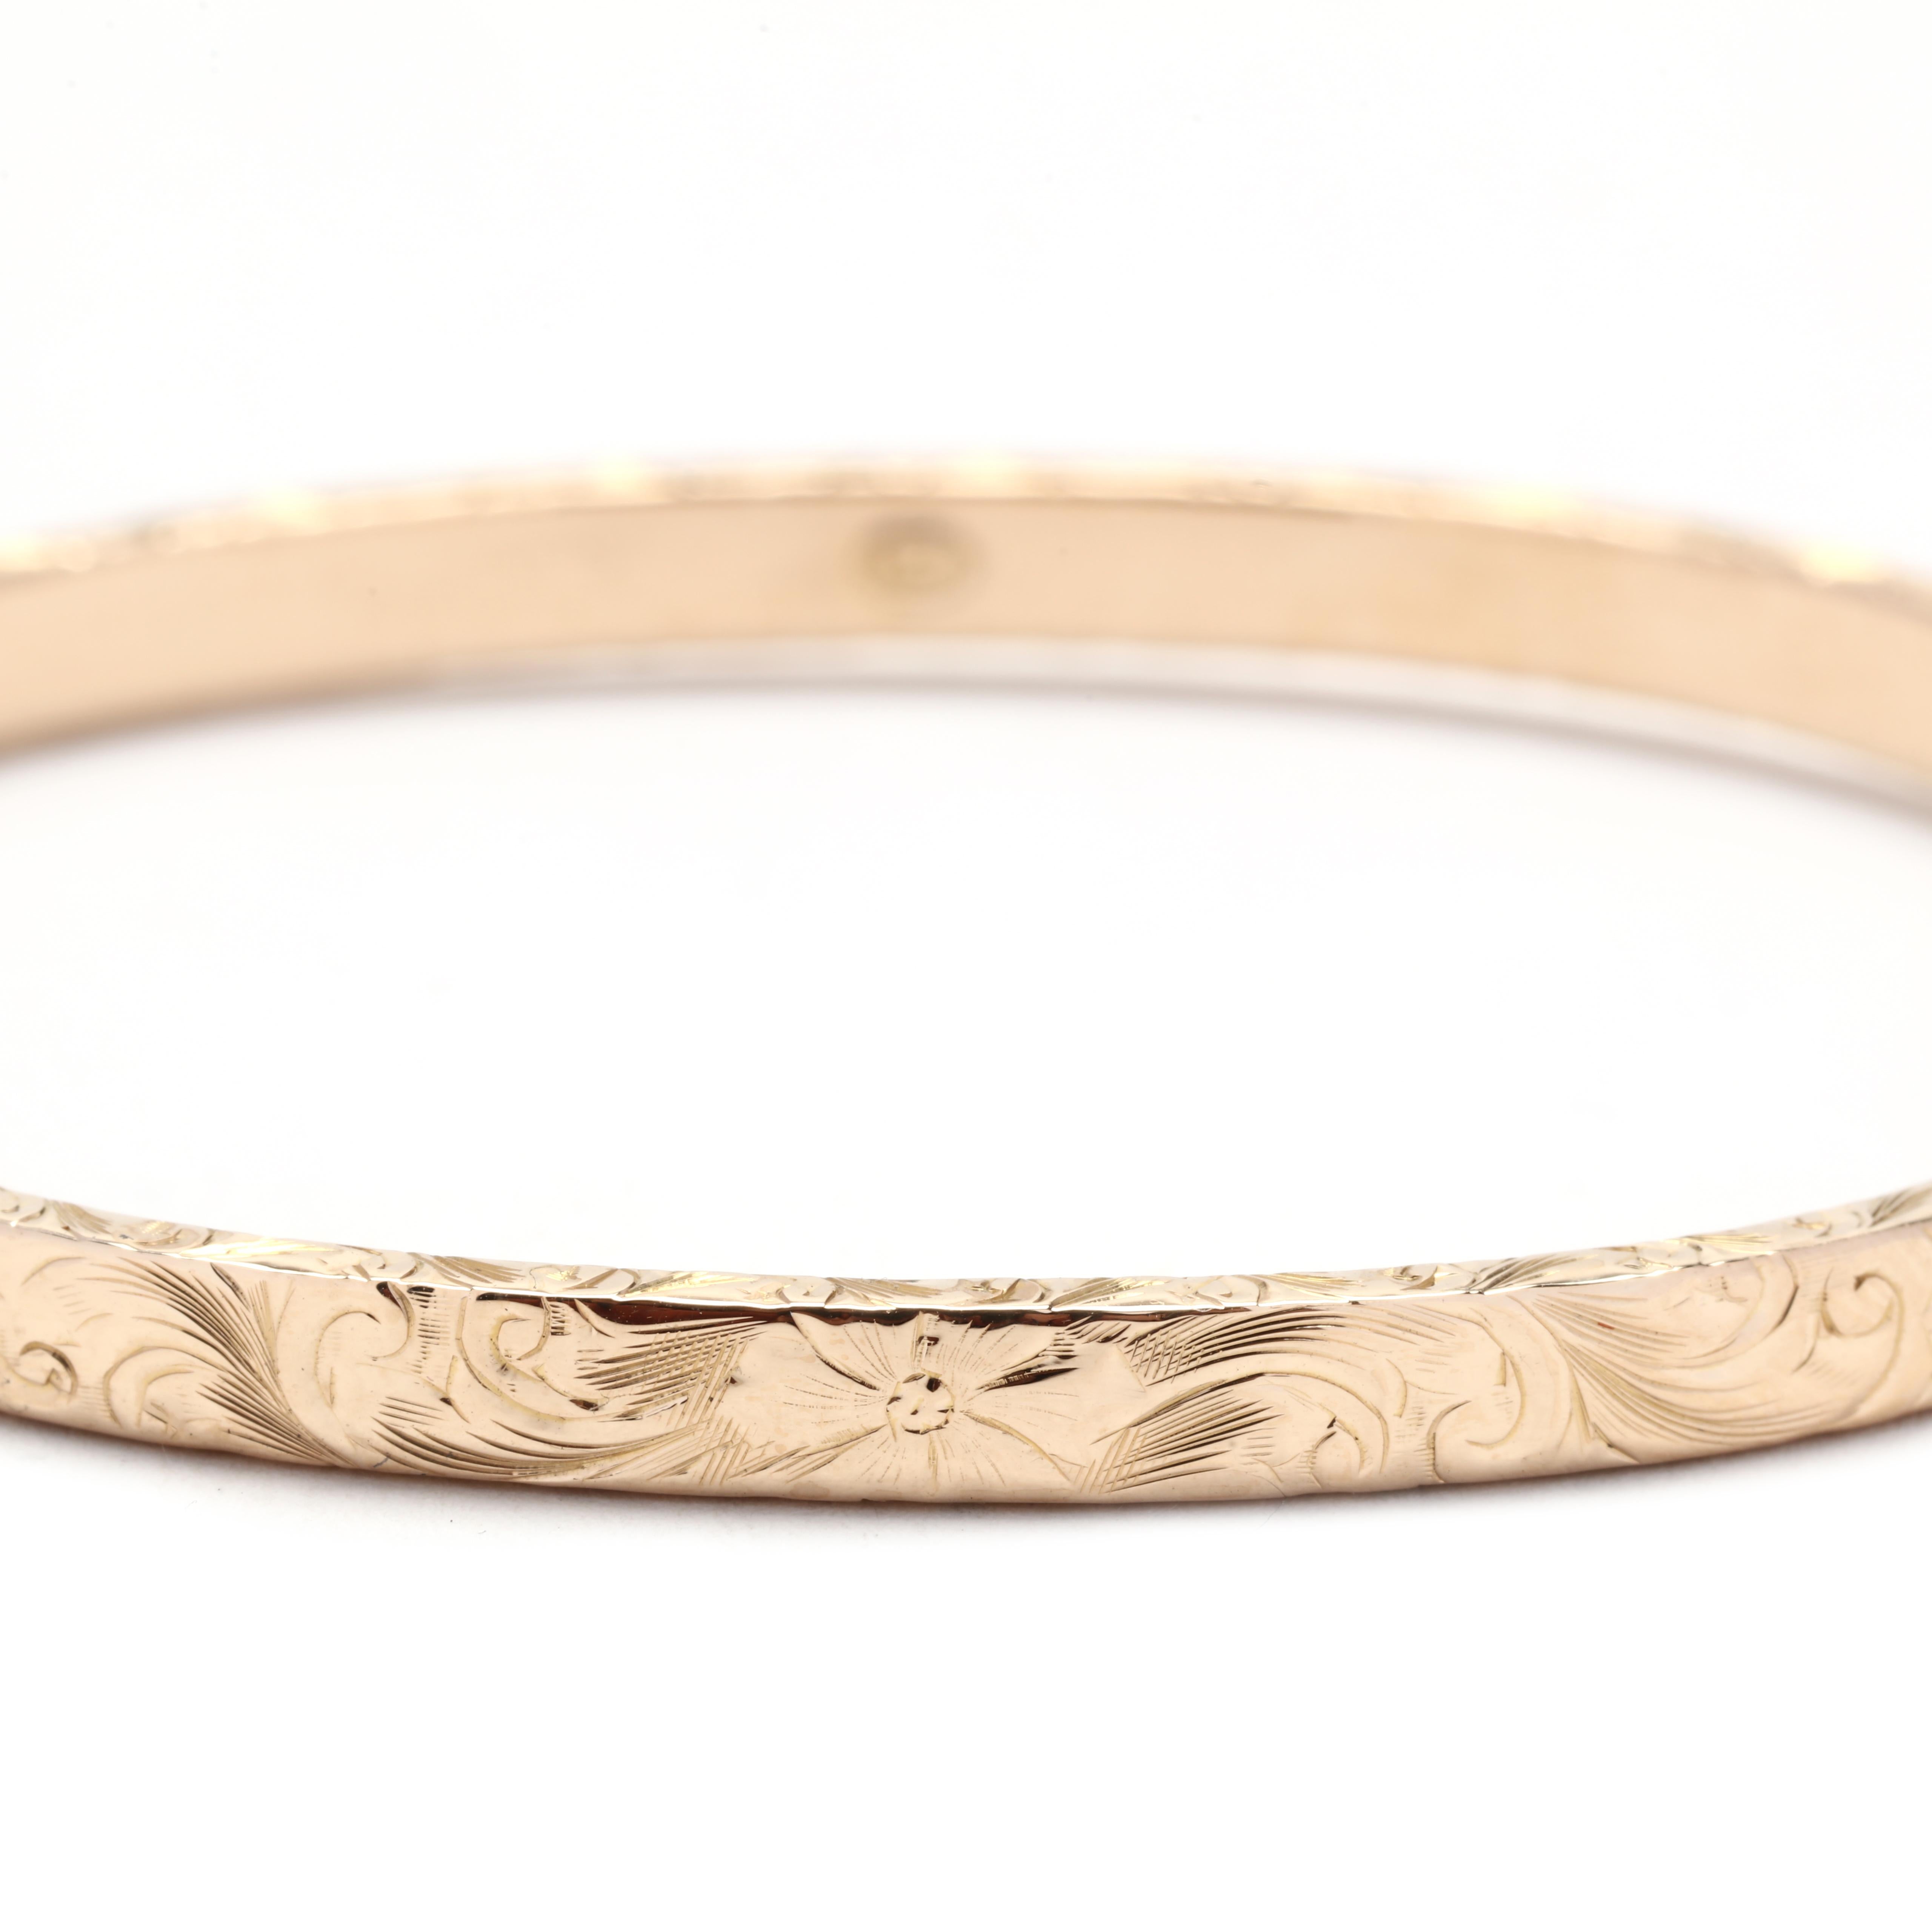 This vintage engraved hinged bangle bracelet is crafted in 14K yellow gold, making it a classic and timeless accessory. The bracelet measures 7 inches in length, making it the perfect fit for most wrists. Its thin and stackable design allows you to